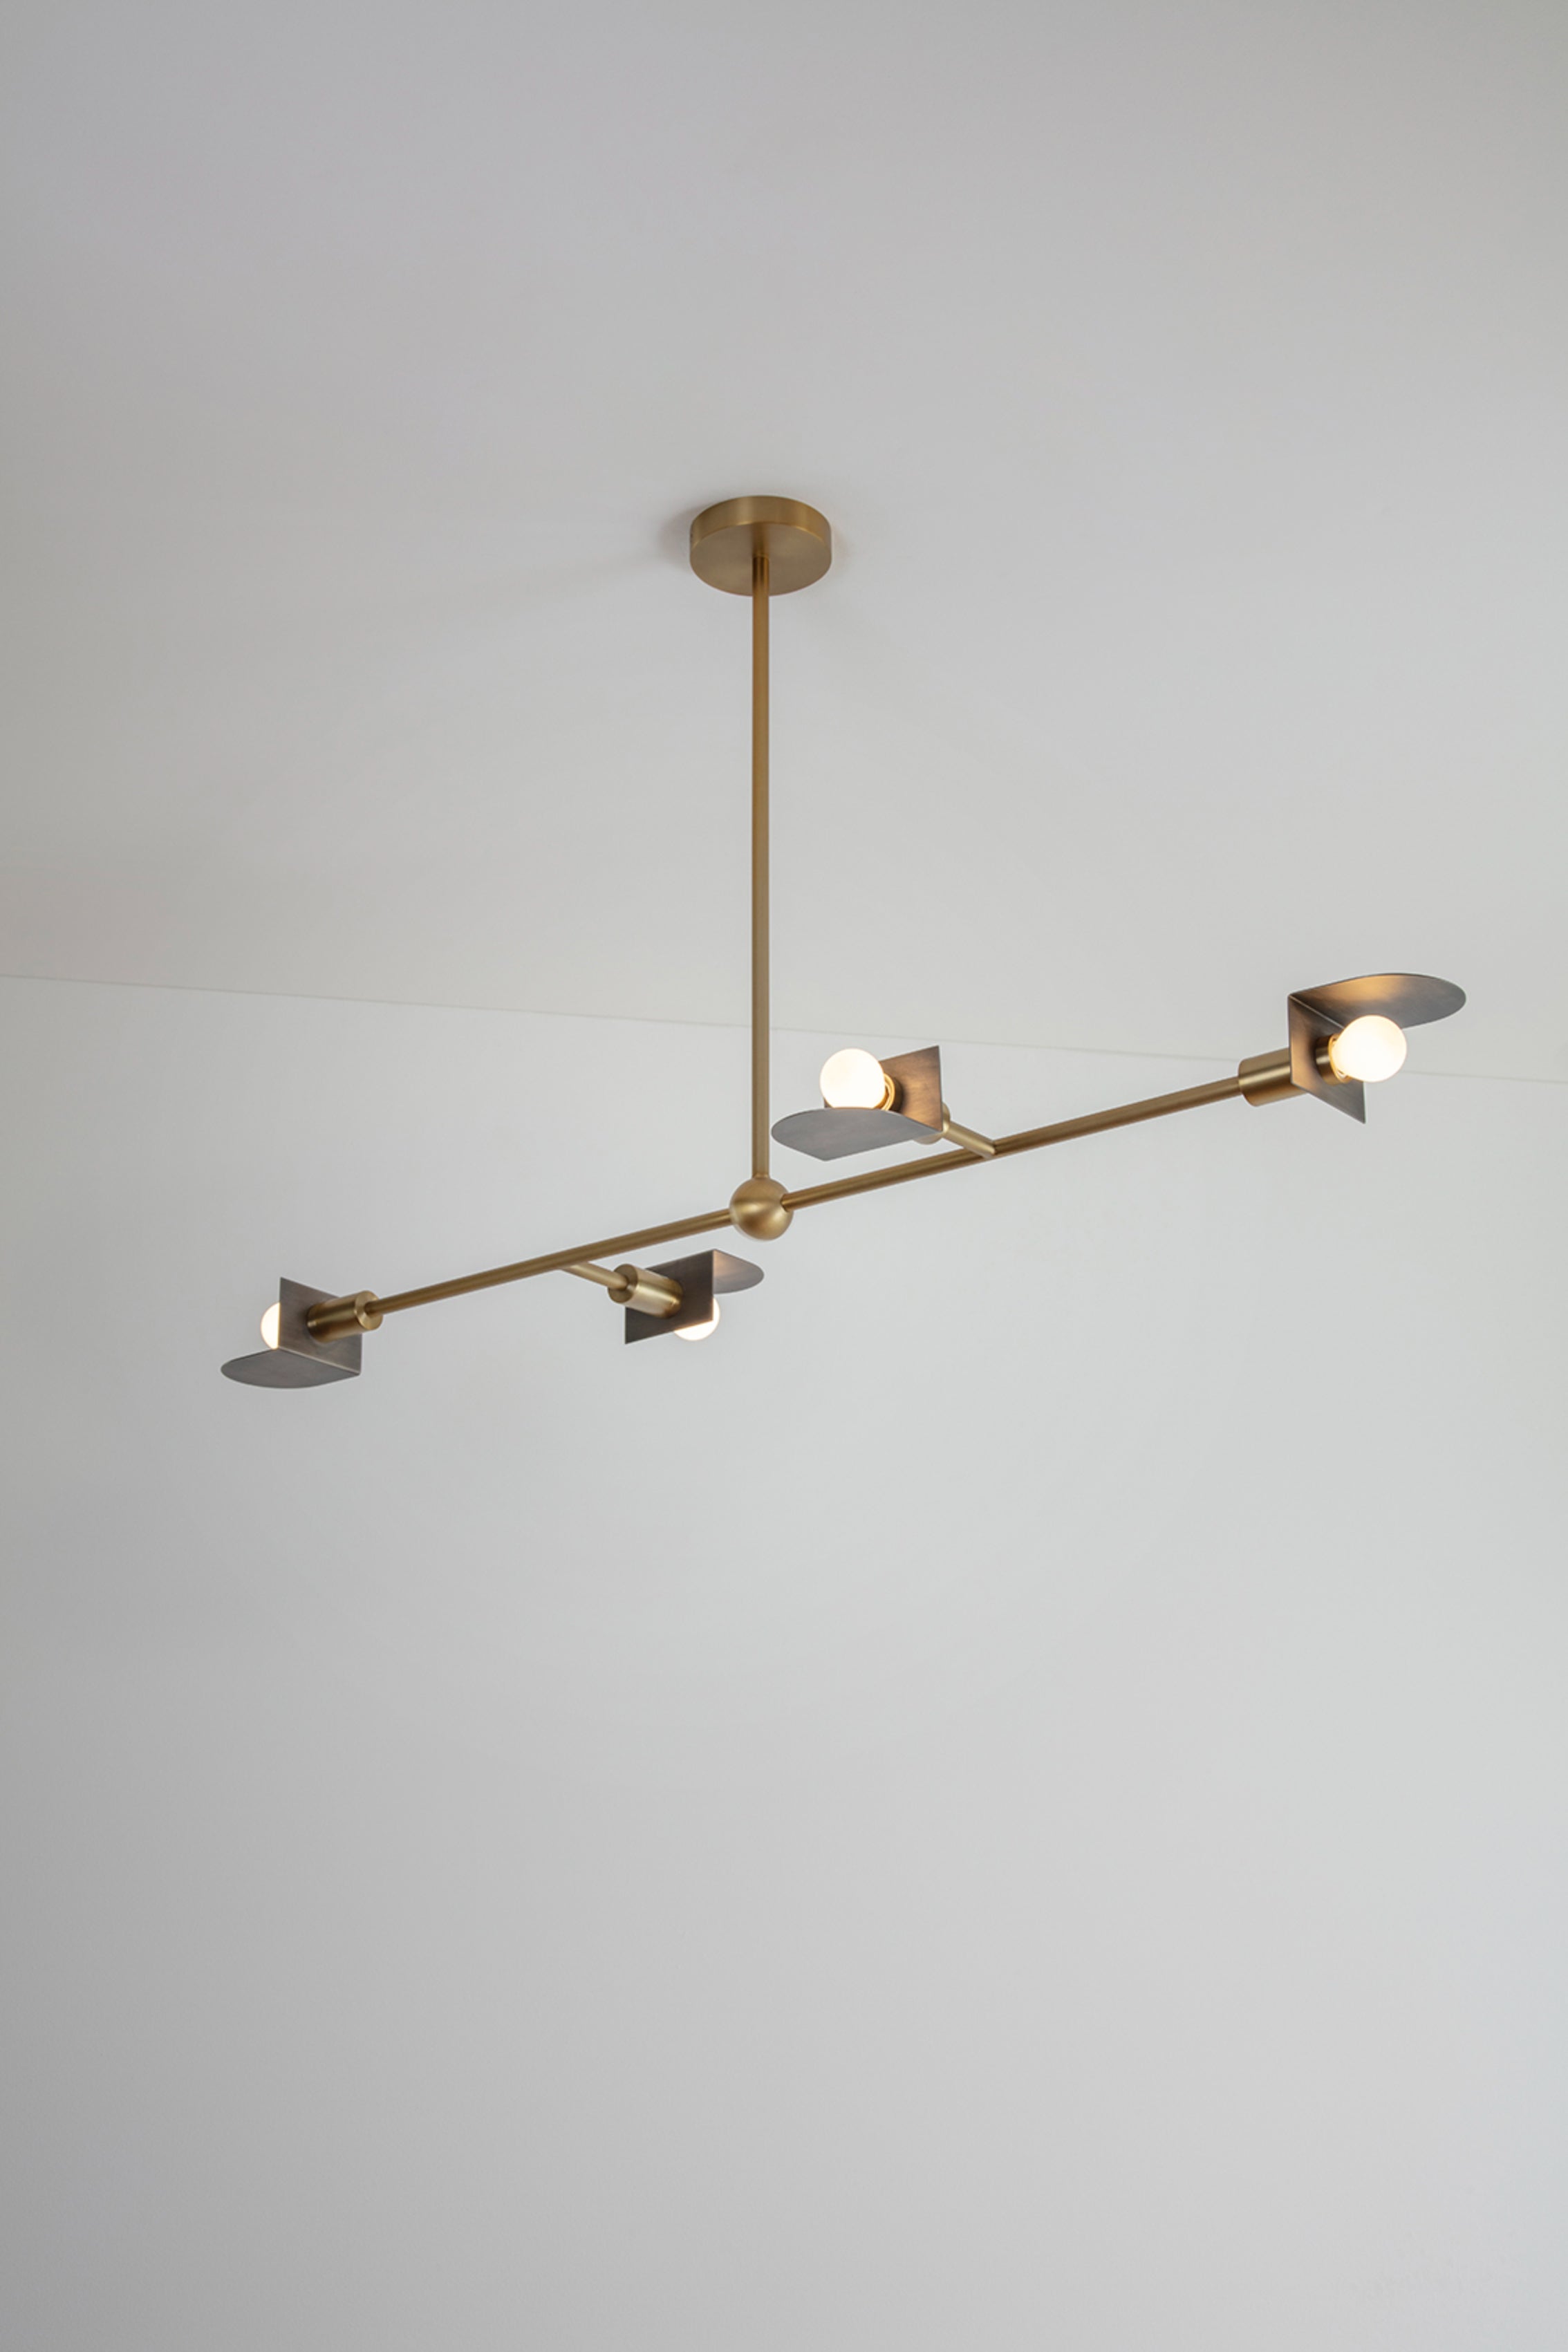 Route I Pendant Light by Square in Circle